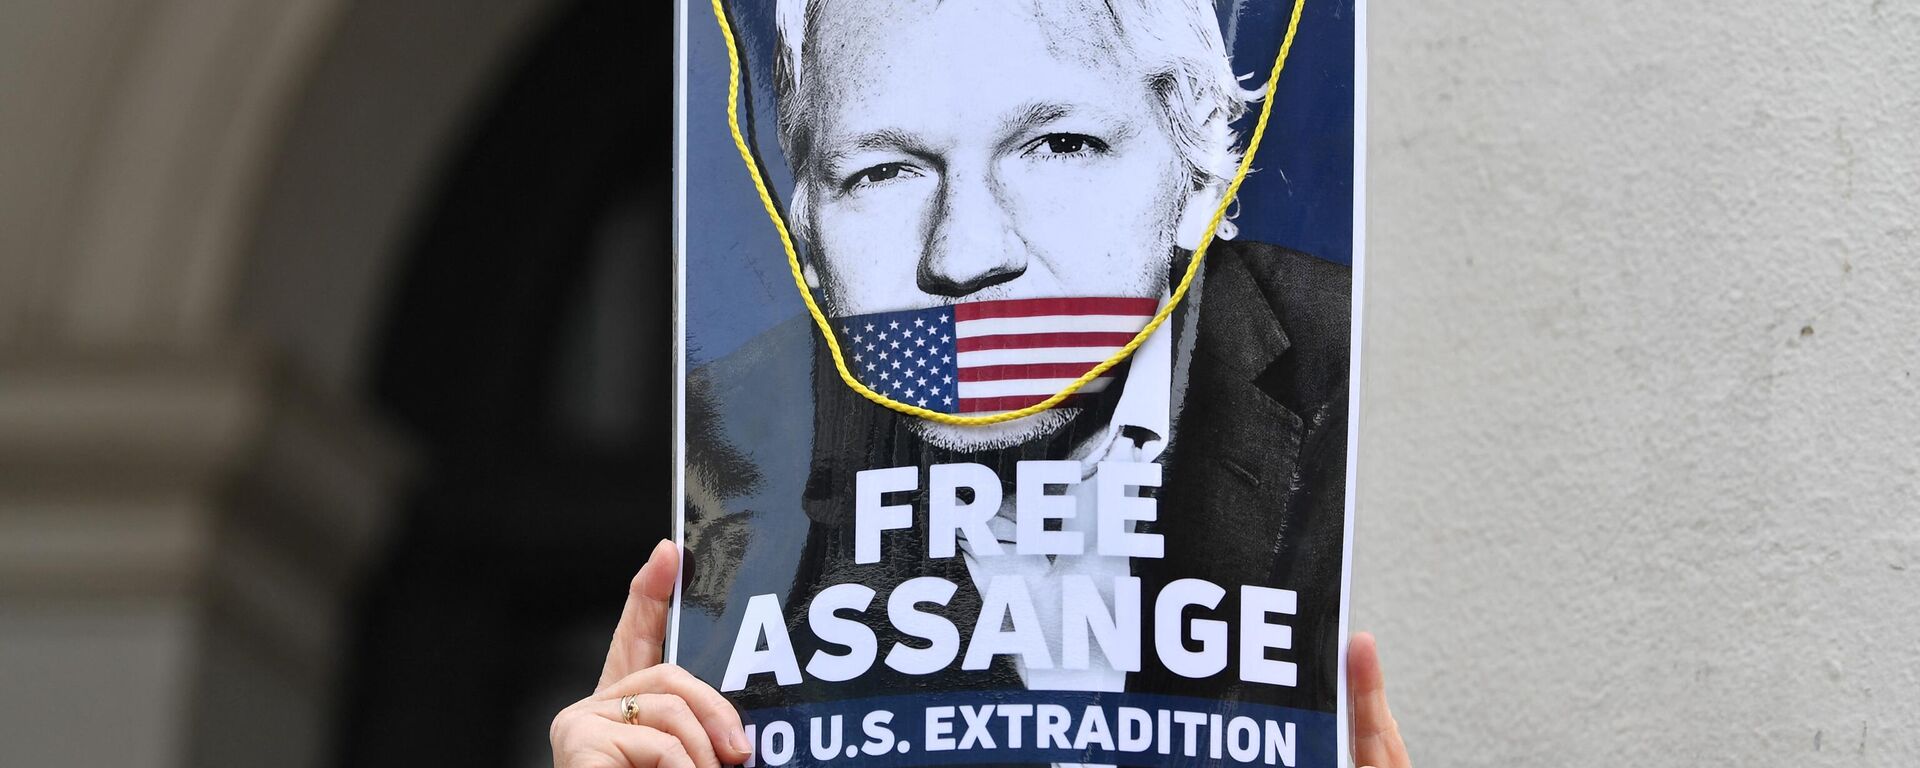 A woman takes part in a demonstration in support of Wikileaks founder Julian Assange who is facing extradition to the USA in Brussels on April 23, 2022 - Sputnik Africa, 1920, 03.05.2023